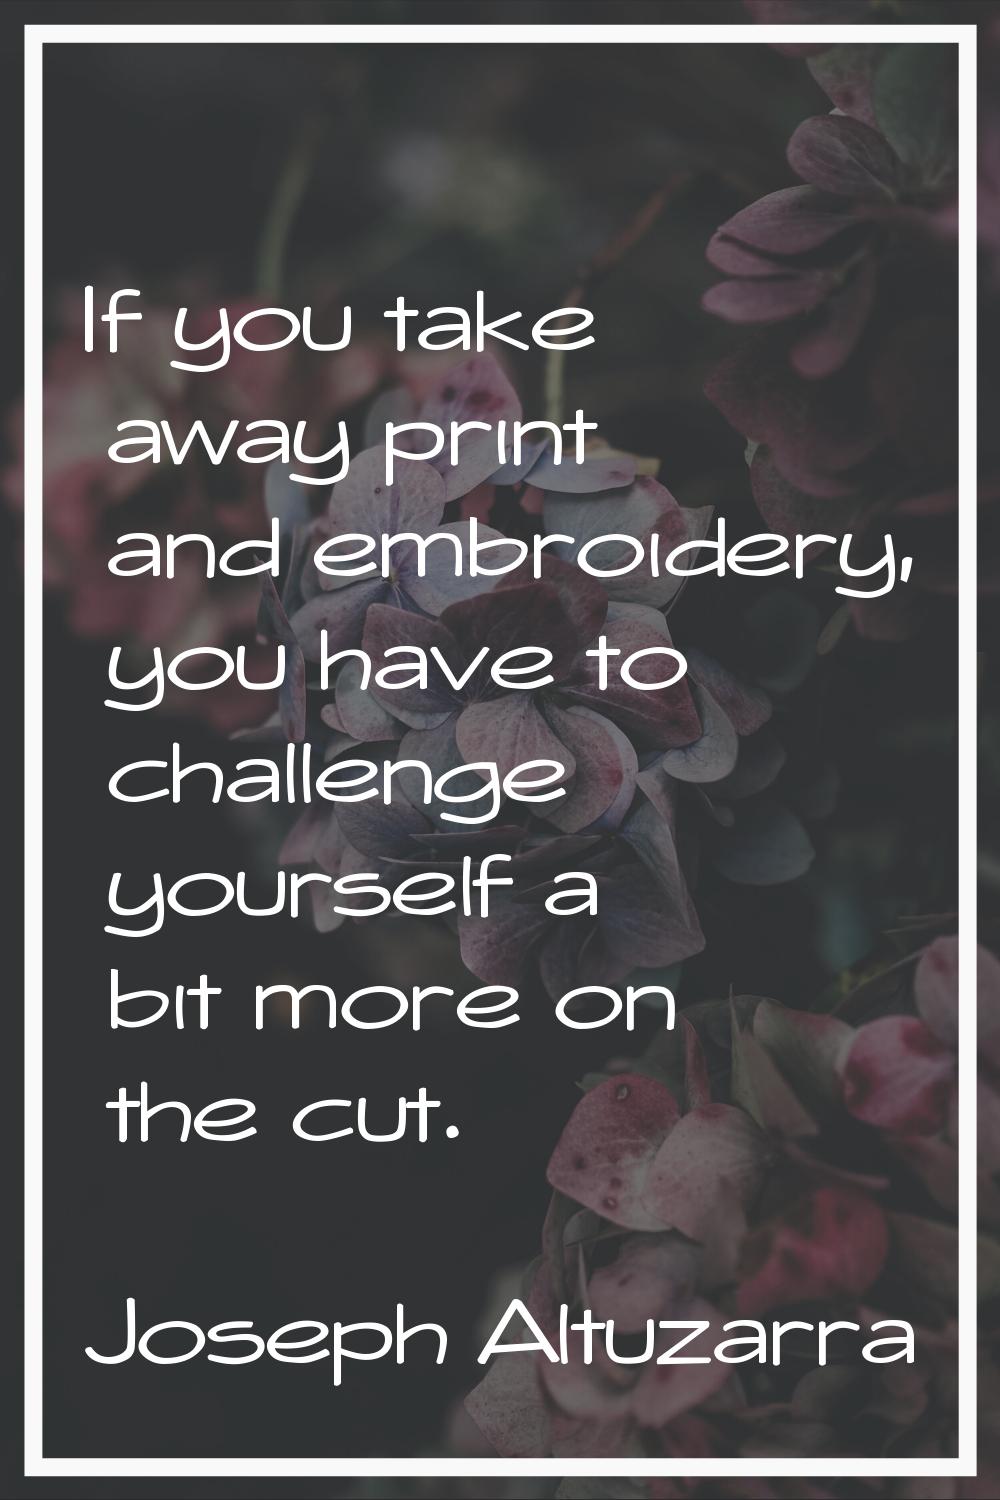 If you take away print and embroidery, you have to challenge yourself a bit more on the cut.